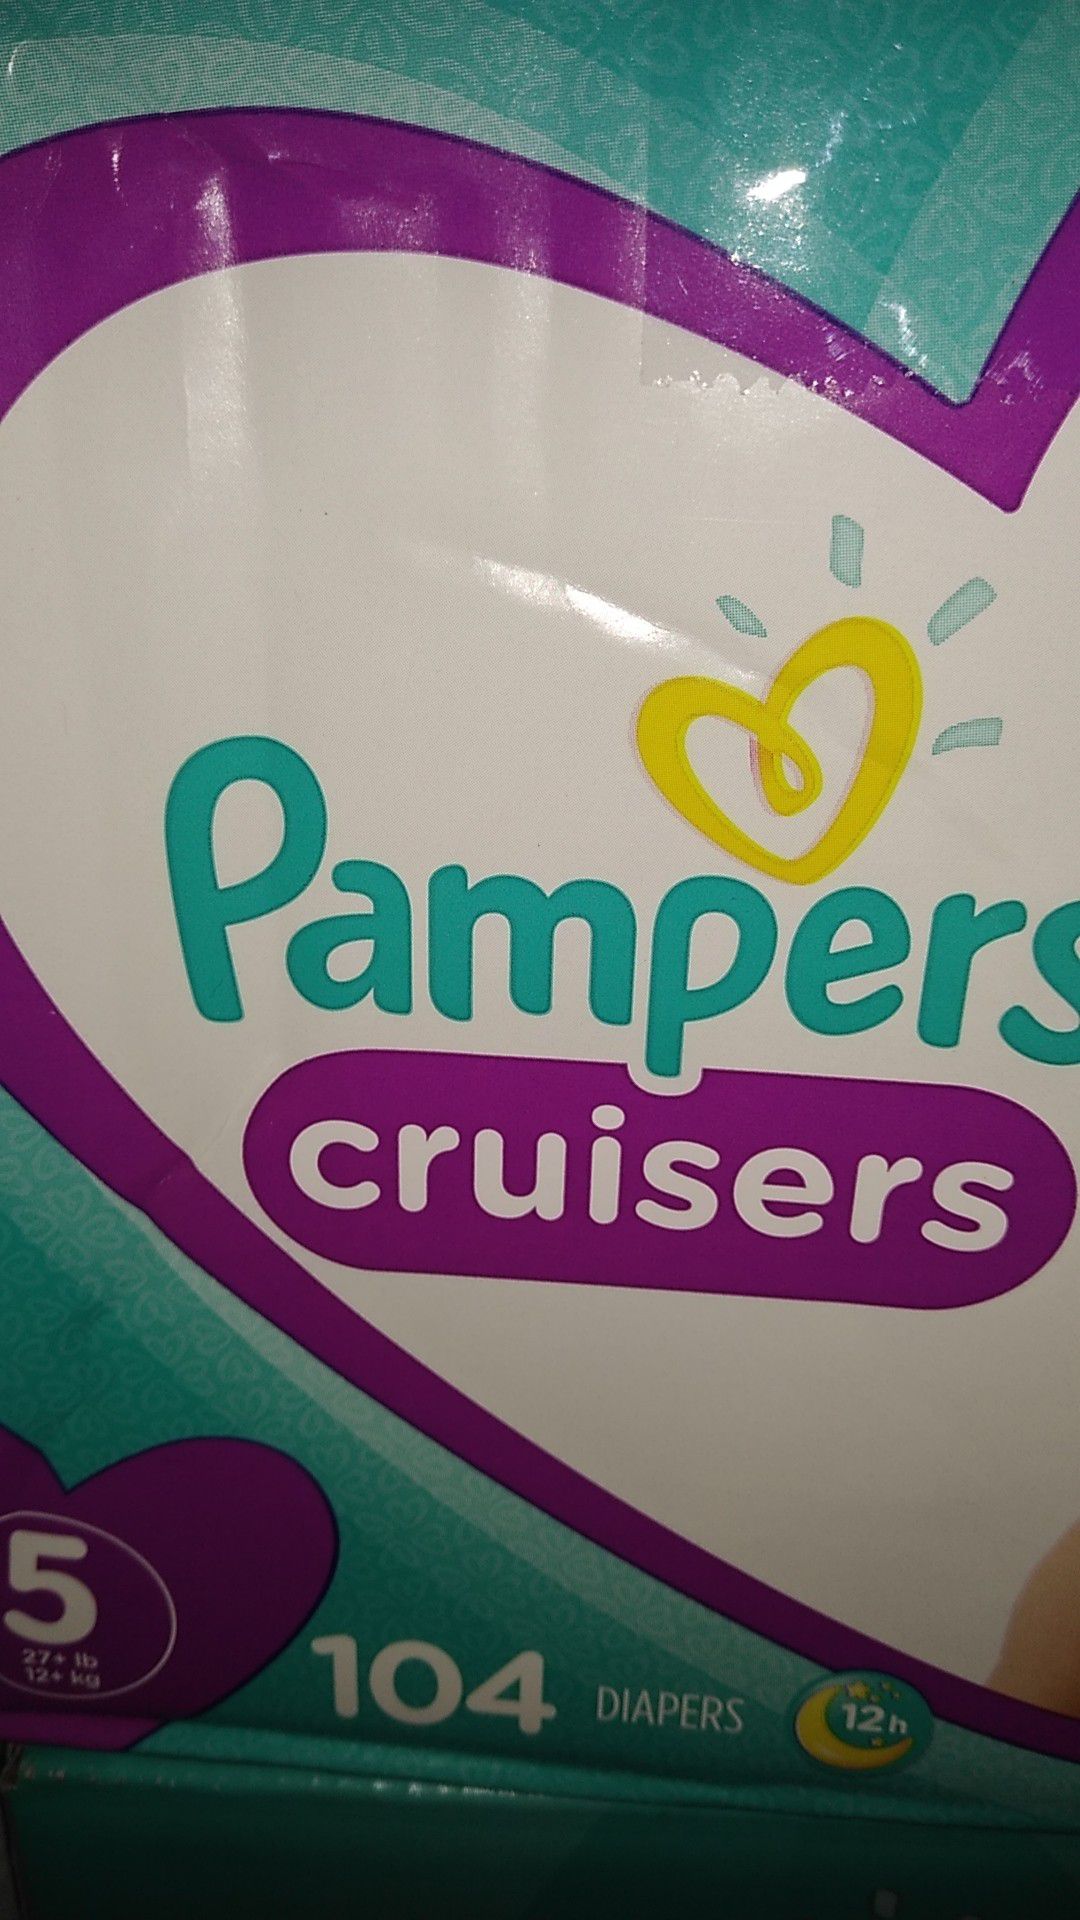 Pampers. If it's posted it's available